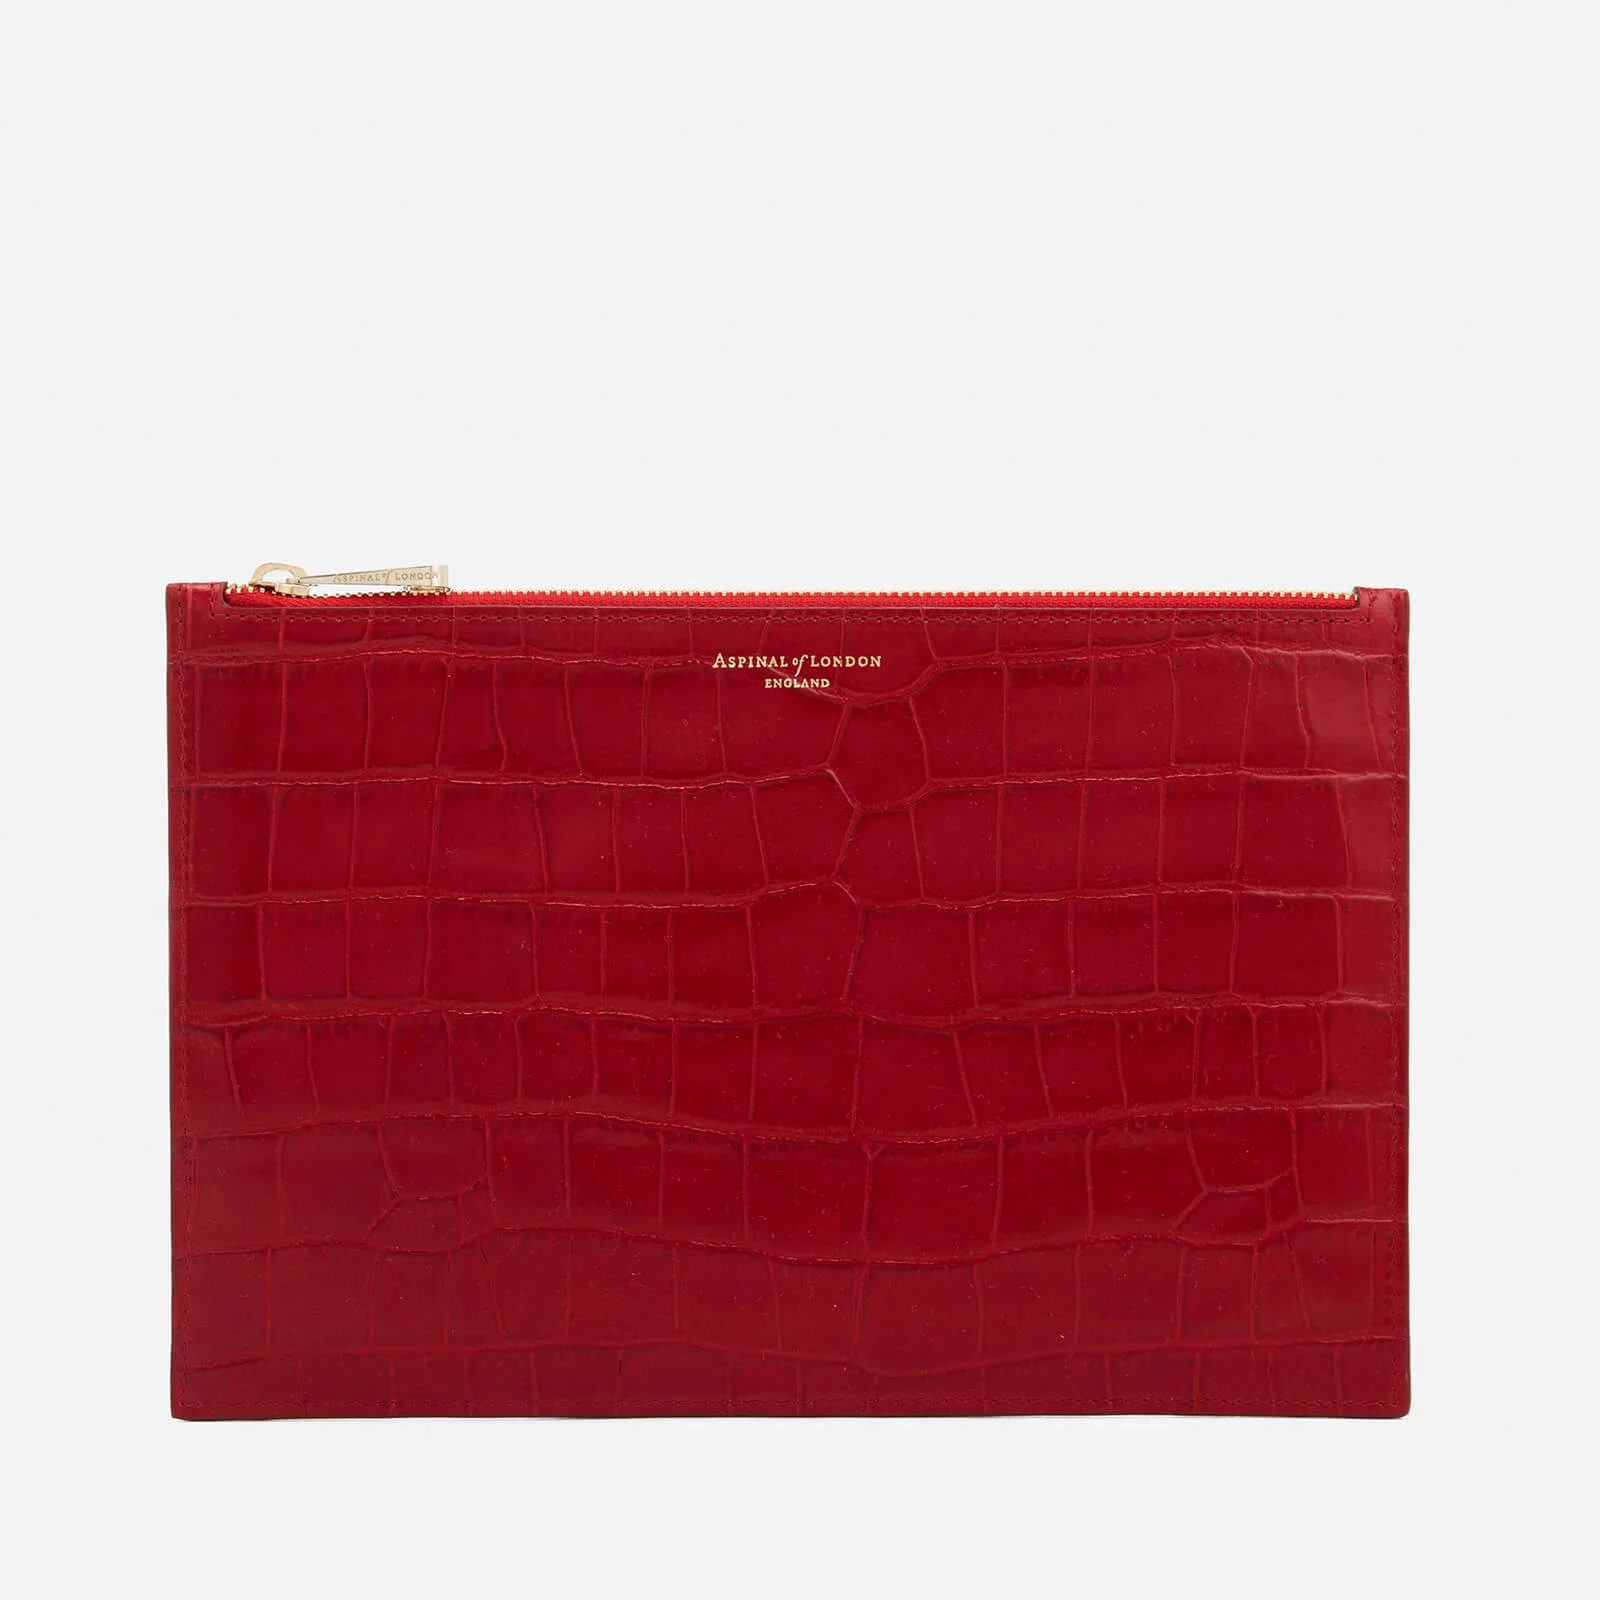 Aspinal of London Women's Essential Large Pouch Bag - Red Image 1